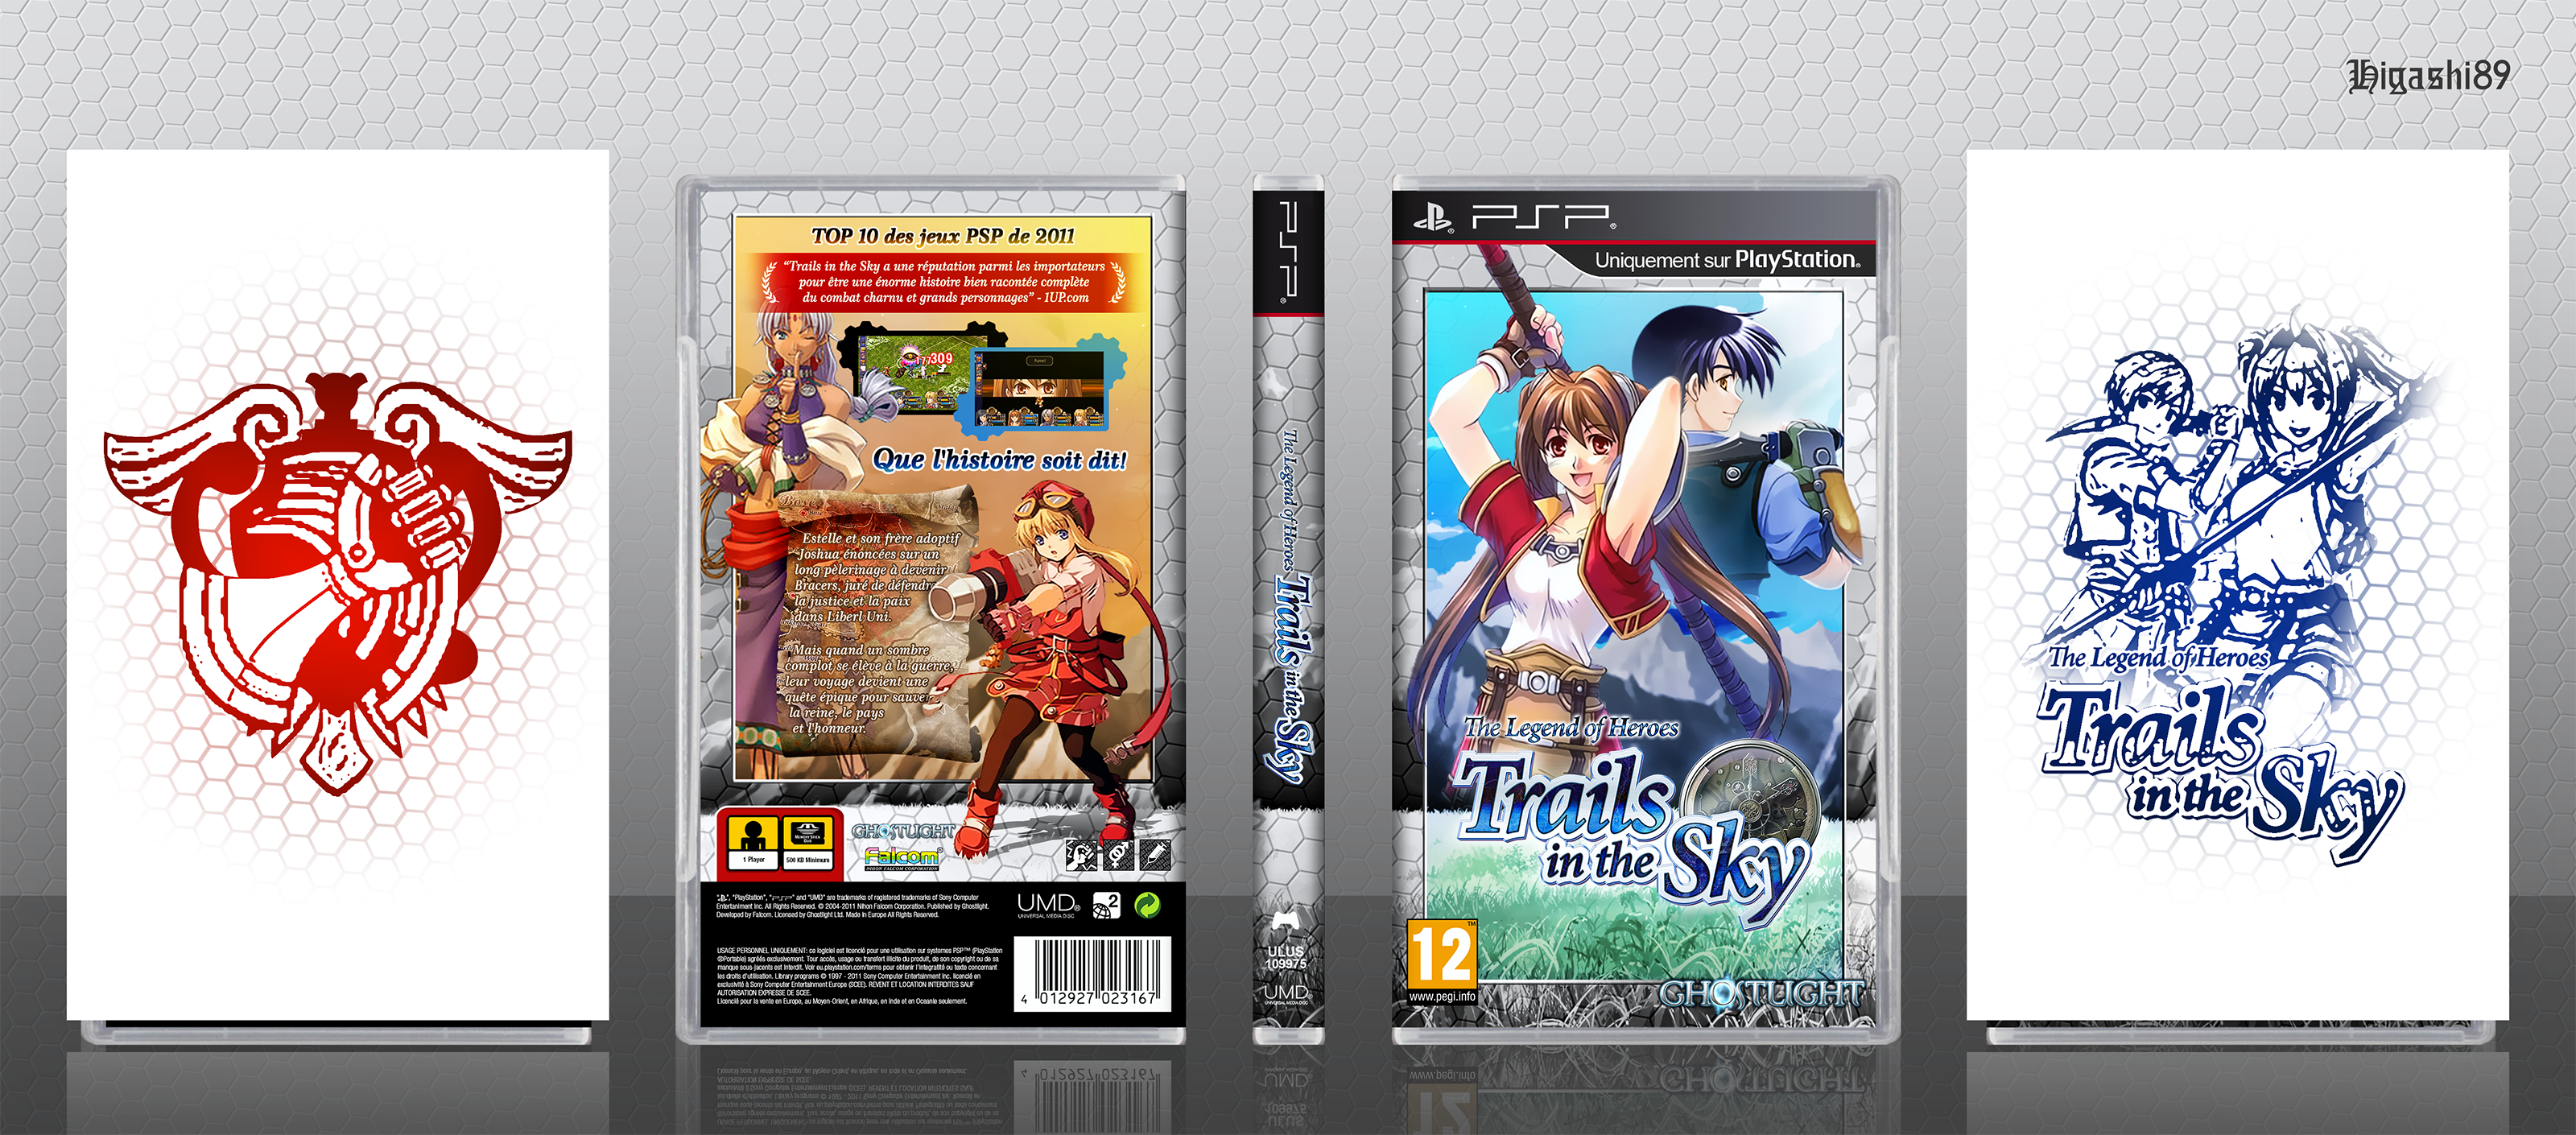 The Legend of Heroes: Trails in the Sky box cover